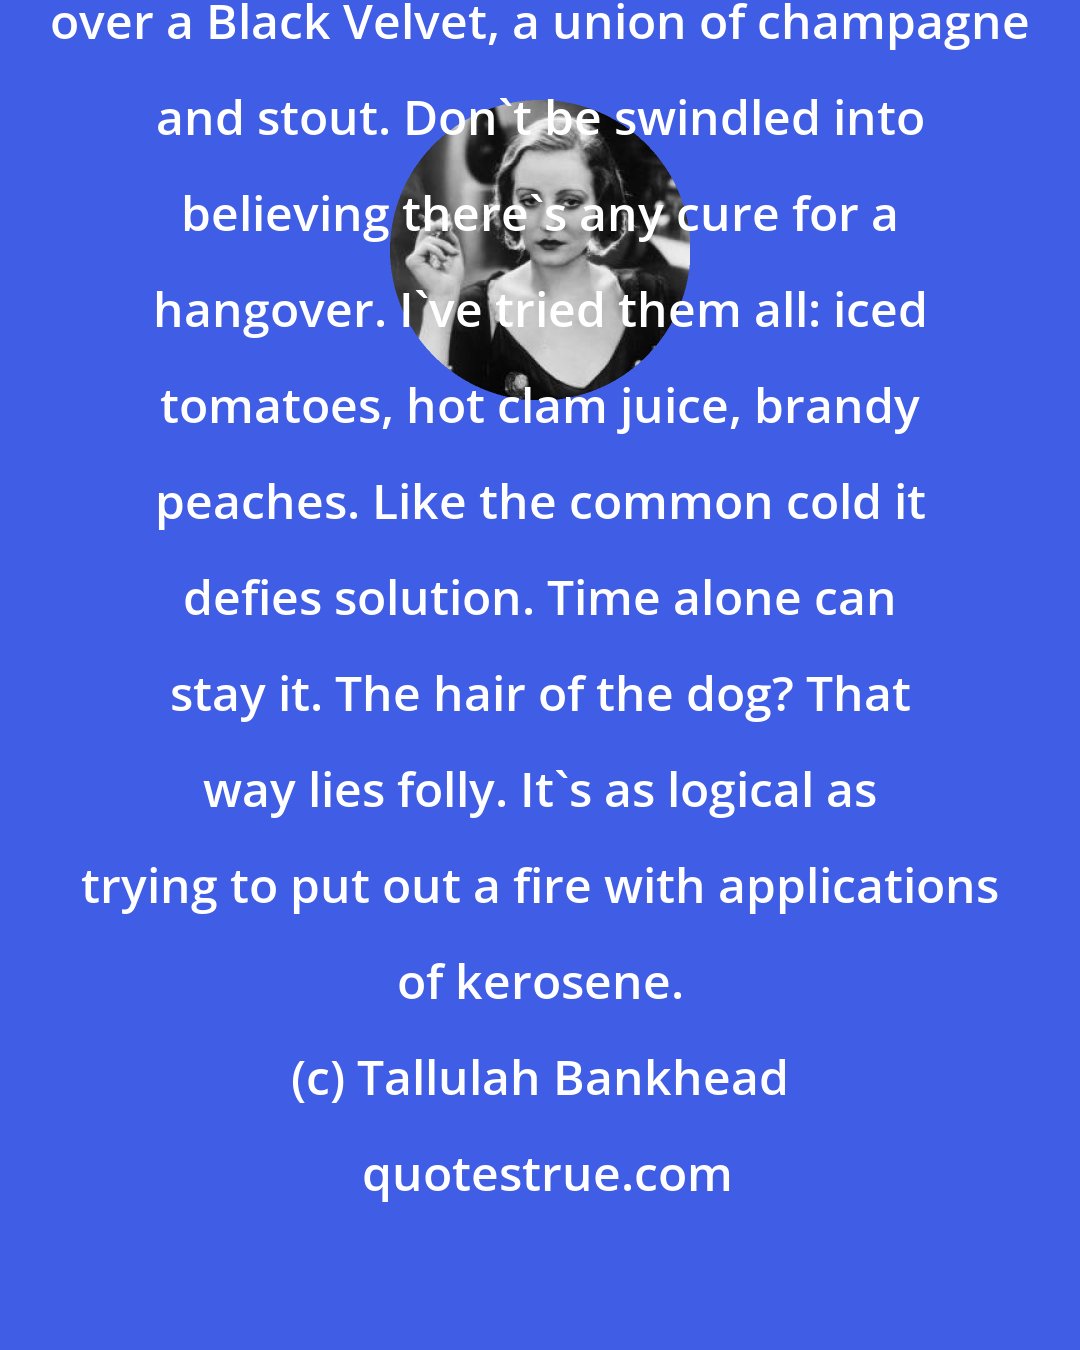 Tallulah Bankhead: Wracked with a hangover I do my muttering over a Black Velvet, a union of champagne and stout. Don't be swindled into believing there's any cure for a hangover. I've tried them all: iced tomatoes, hot clam juice, brandy peaches. Like the common cold it defies solution. Time alone can stay it. The hair of the dog? That way lies folly. It's as logical as trying to put out a fire with applications of kerosene.